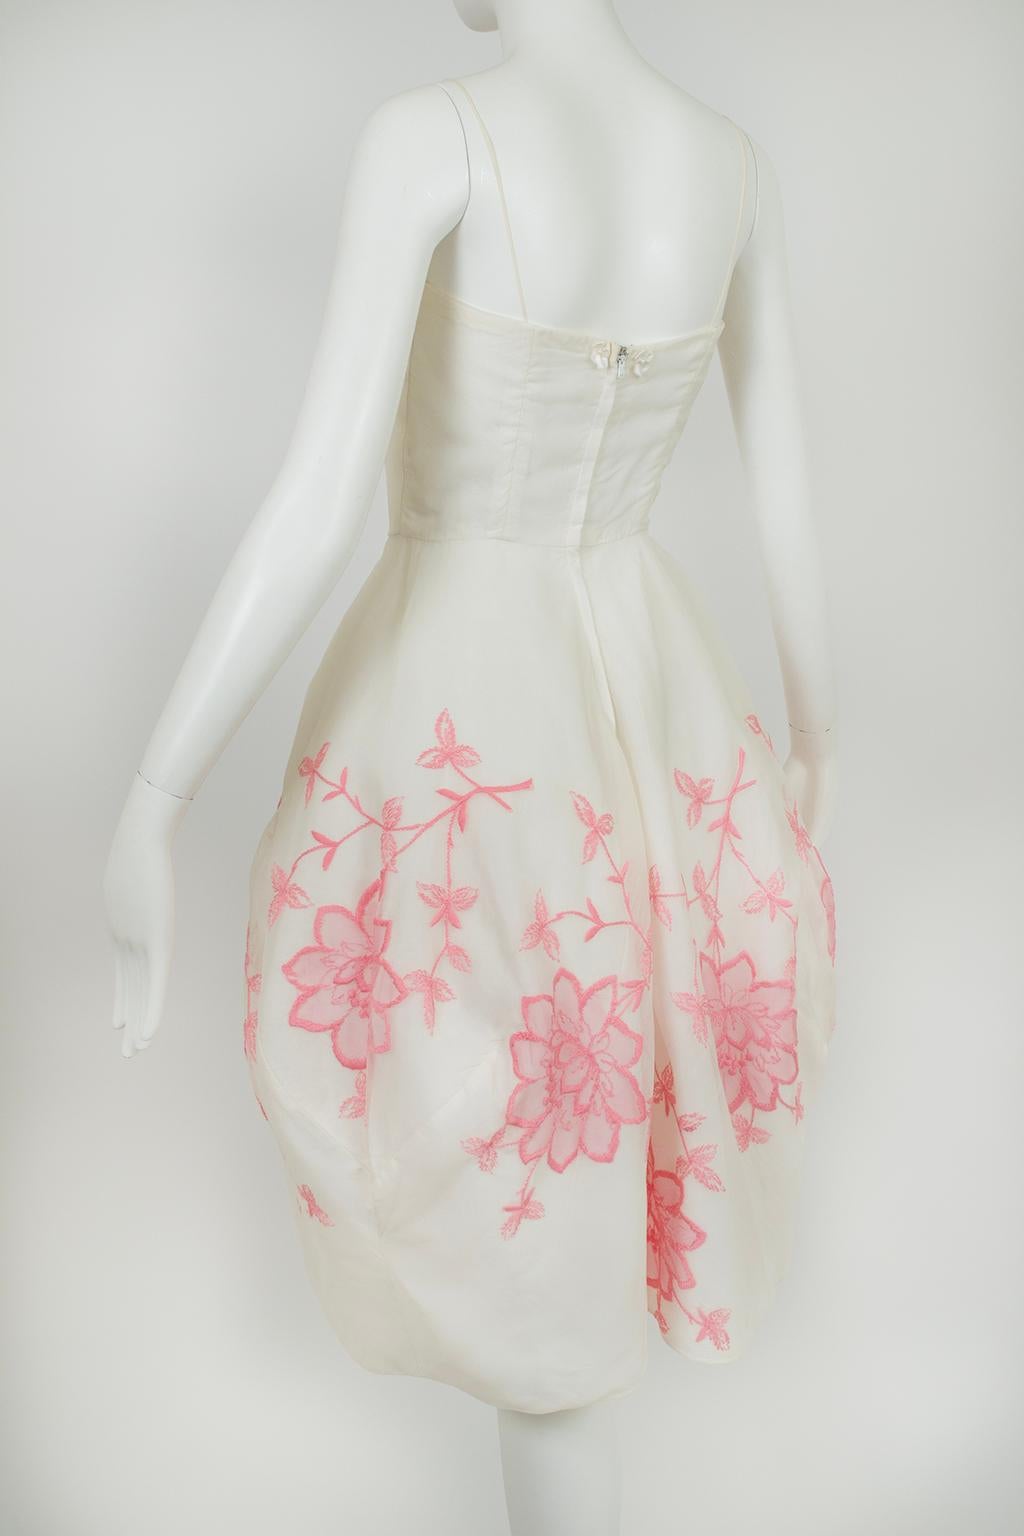 White and Pink Embroidered Bubble Hem Party Dress w Petal Bust – S, 1950s In Good Condition For Sale In Tucson, AZ